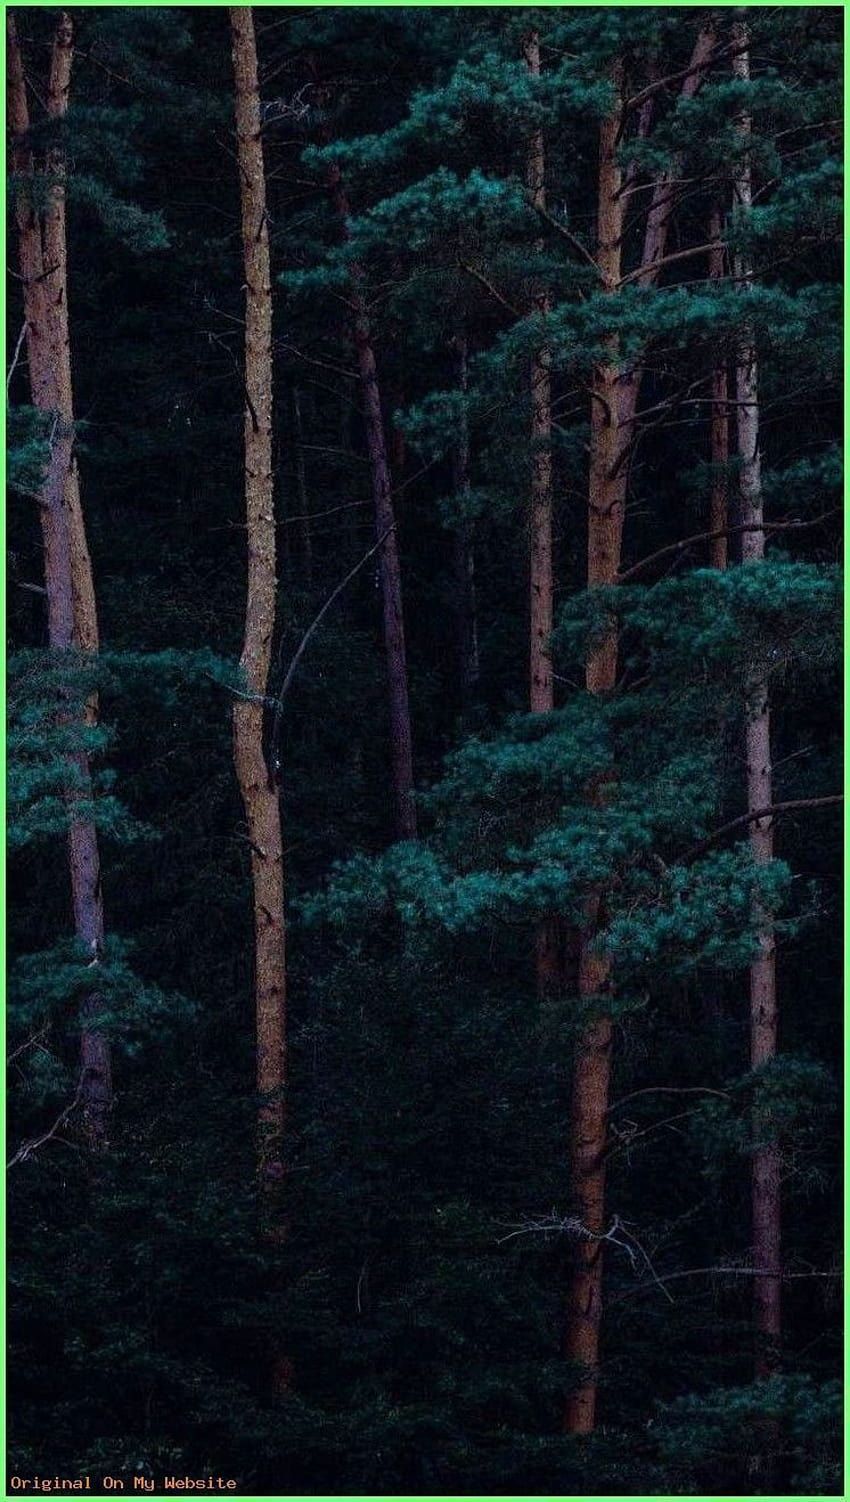 A group of trees in the forest - Woods, forest